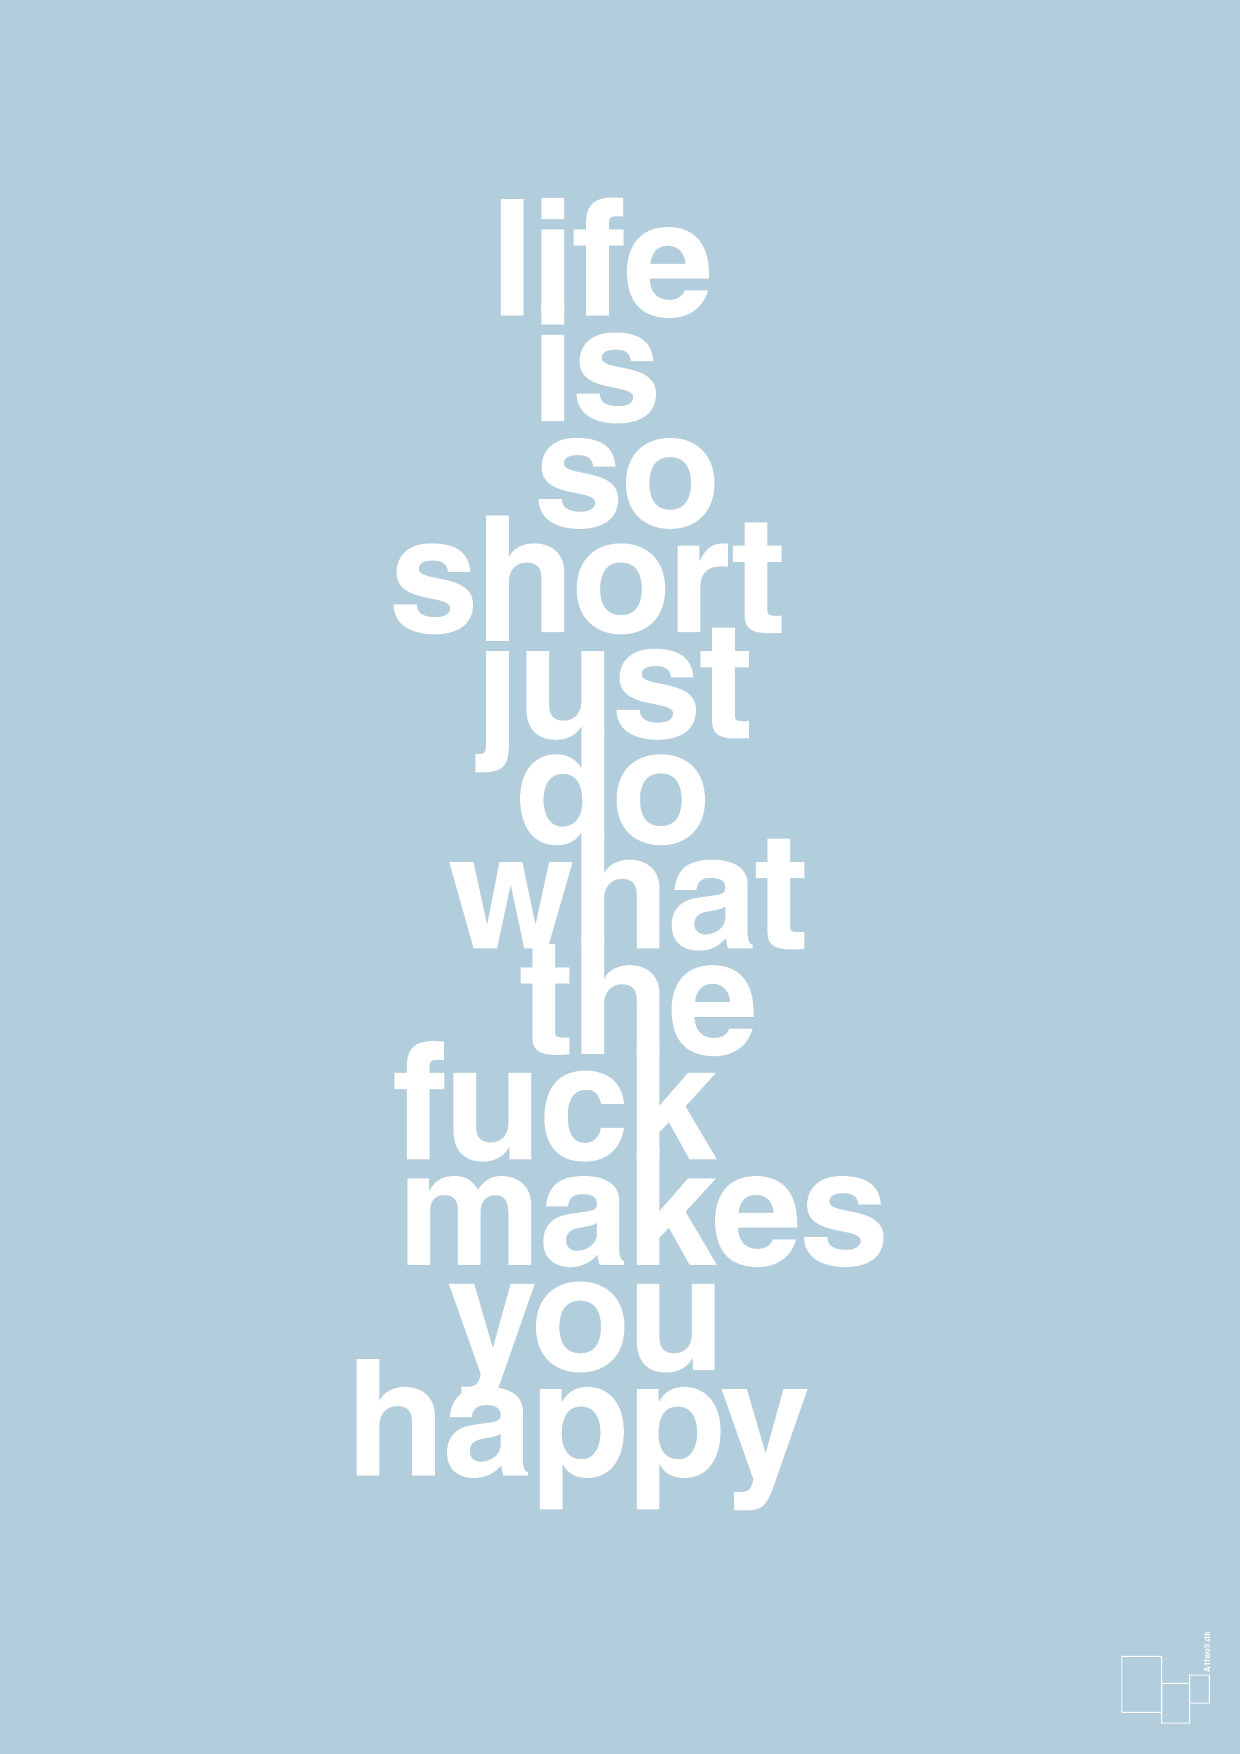 life is so short just do what the fuck makes you happy - Plakat med Ordsprog i Heavenly Blue